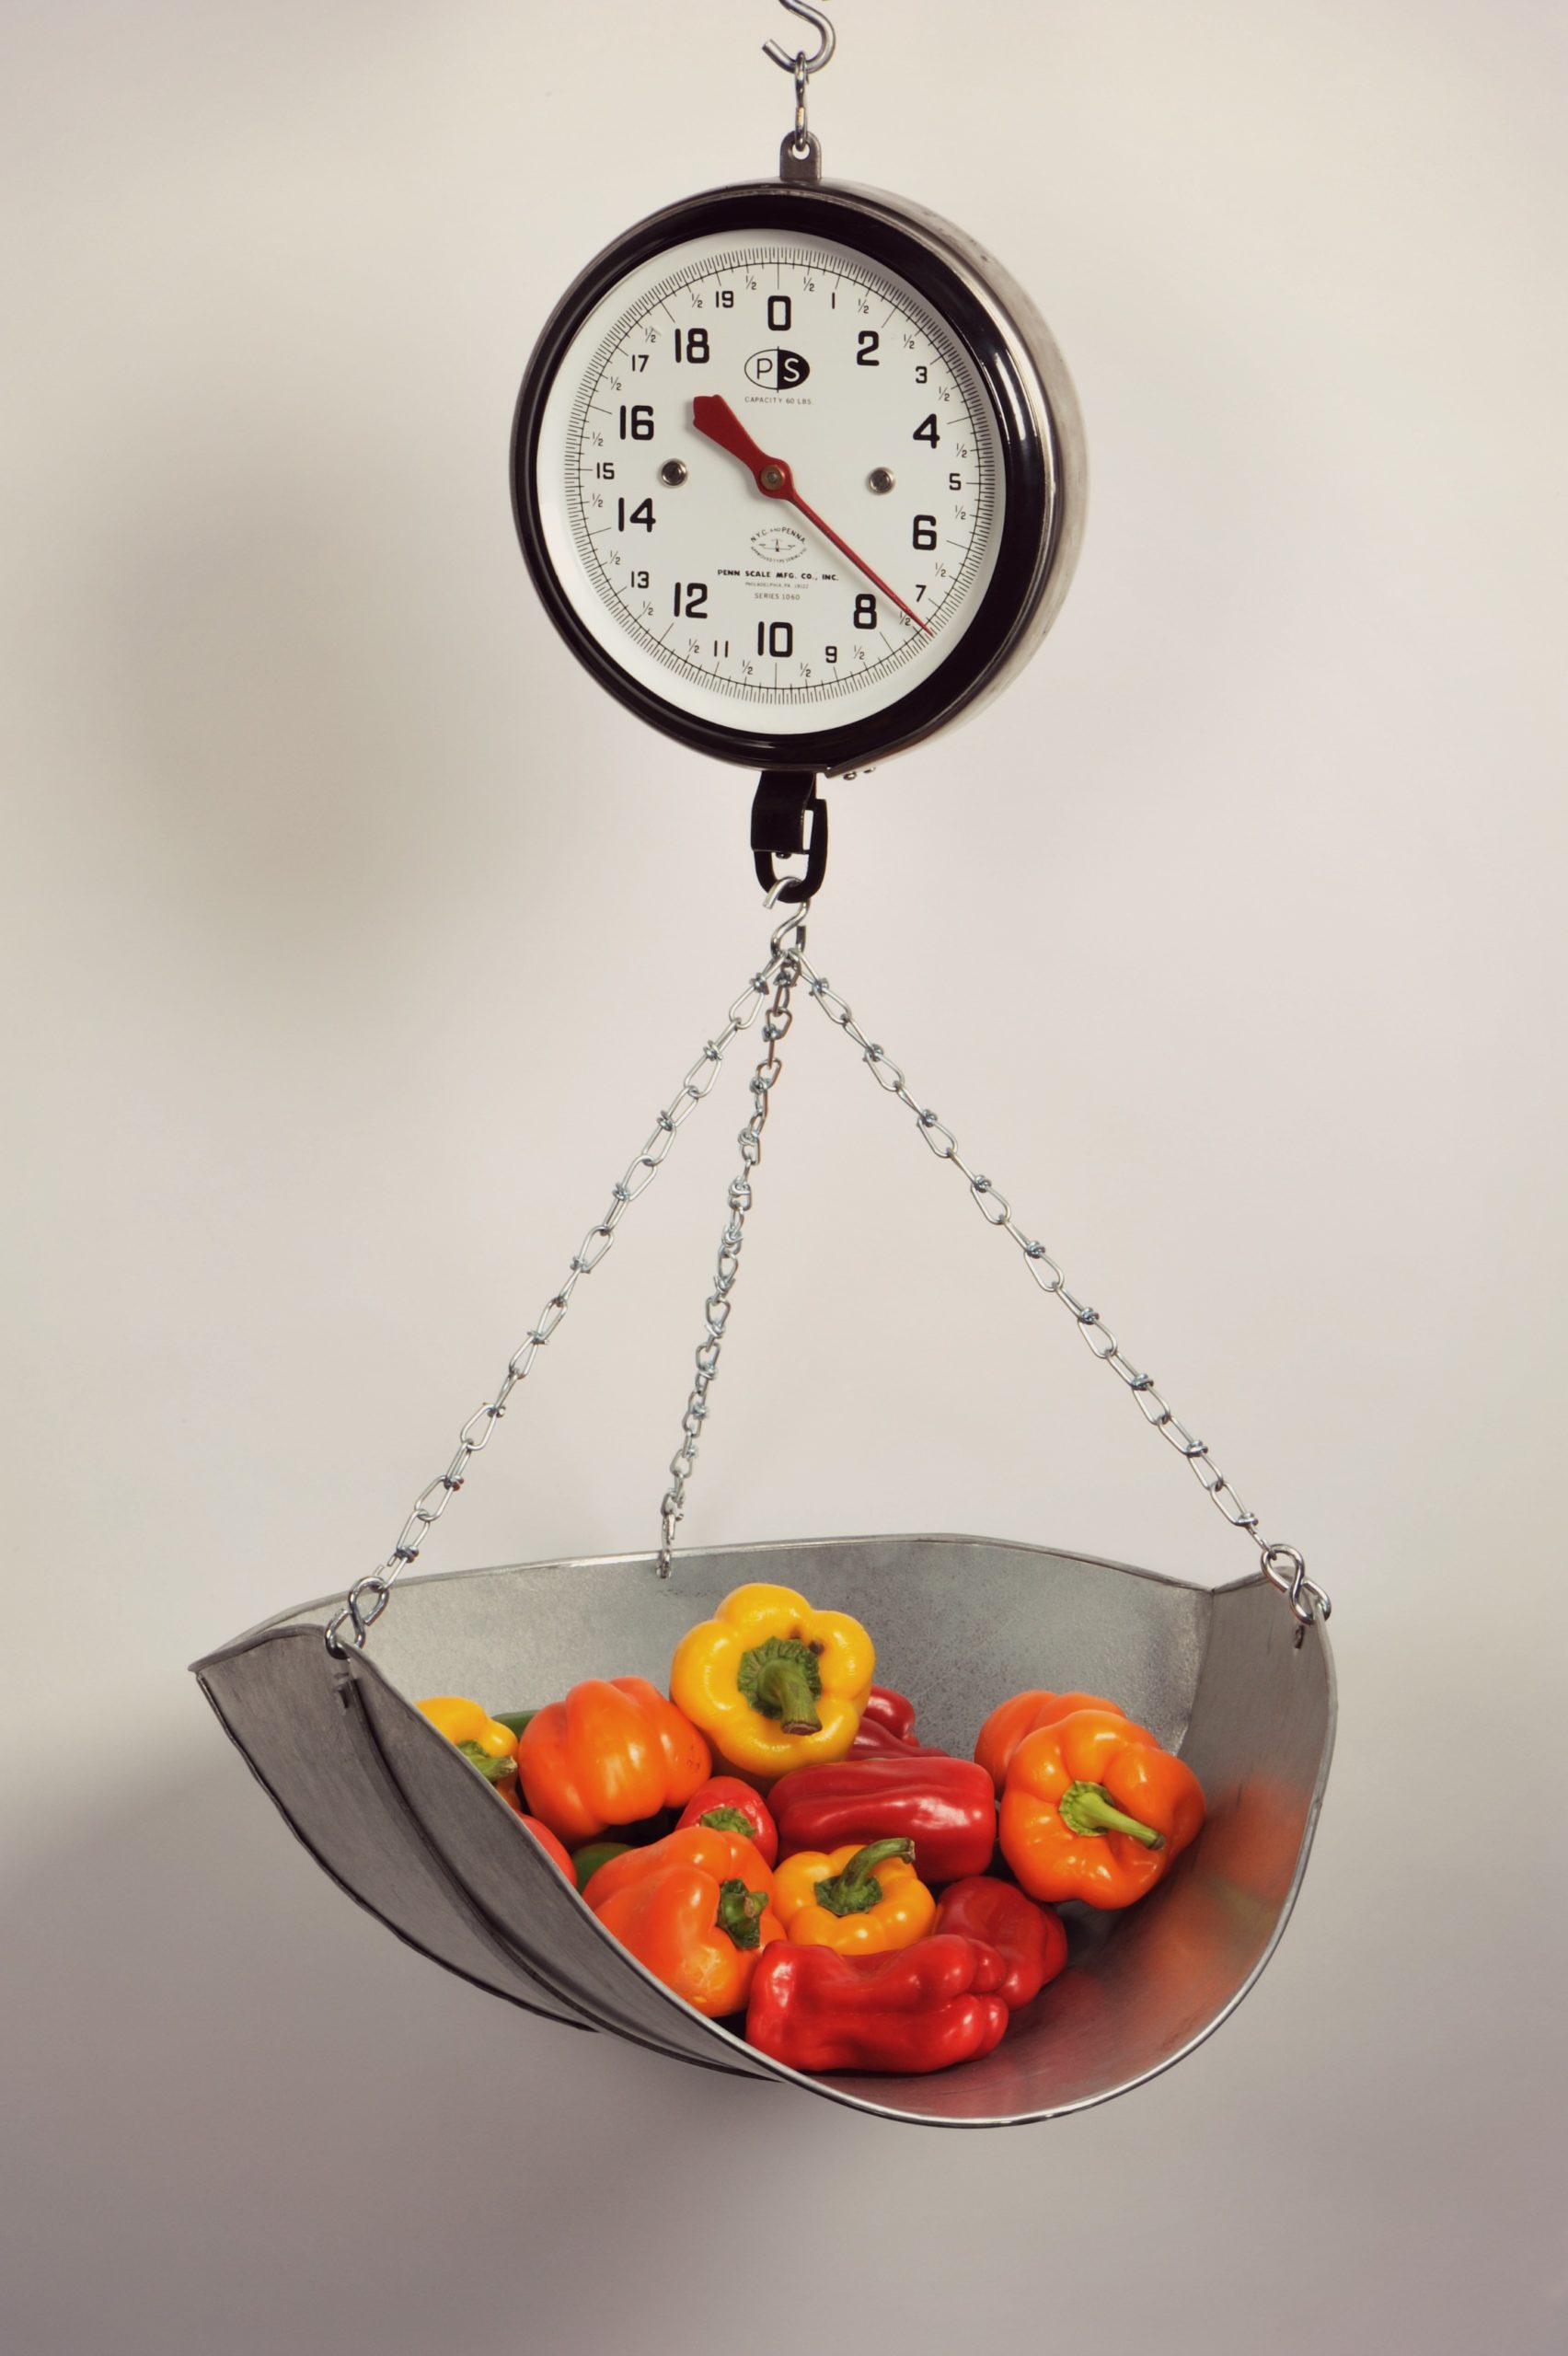 Hanging Fruit & Vegetable Scale - 820-HG Single Dial